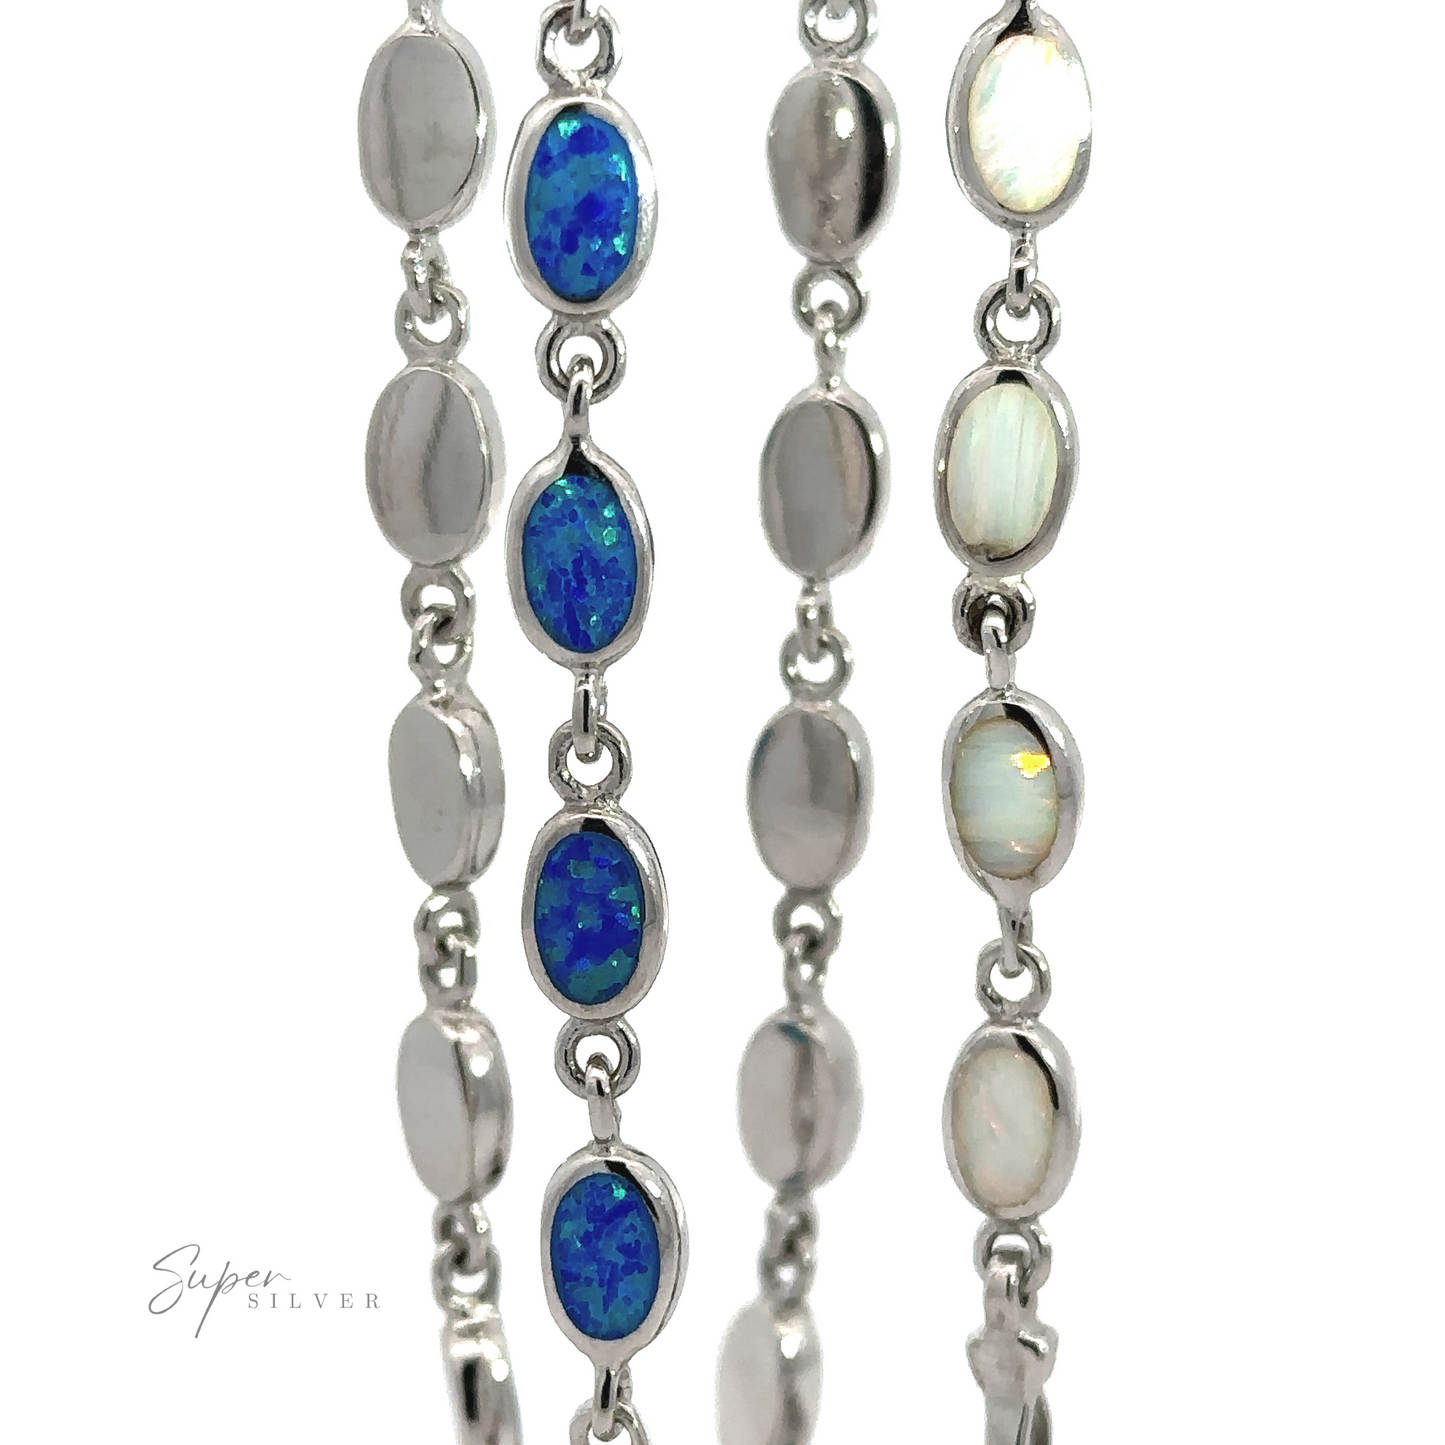 A set of two Simple Oval Link Opal Bracelets, one with blue opal insets and the other with white opal insets, displayed against a white background.